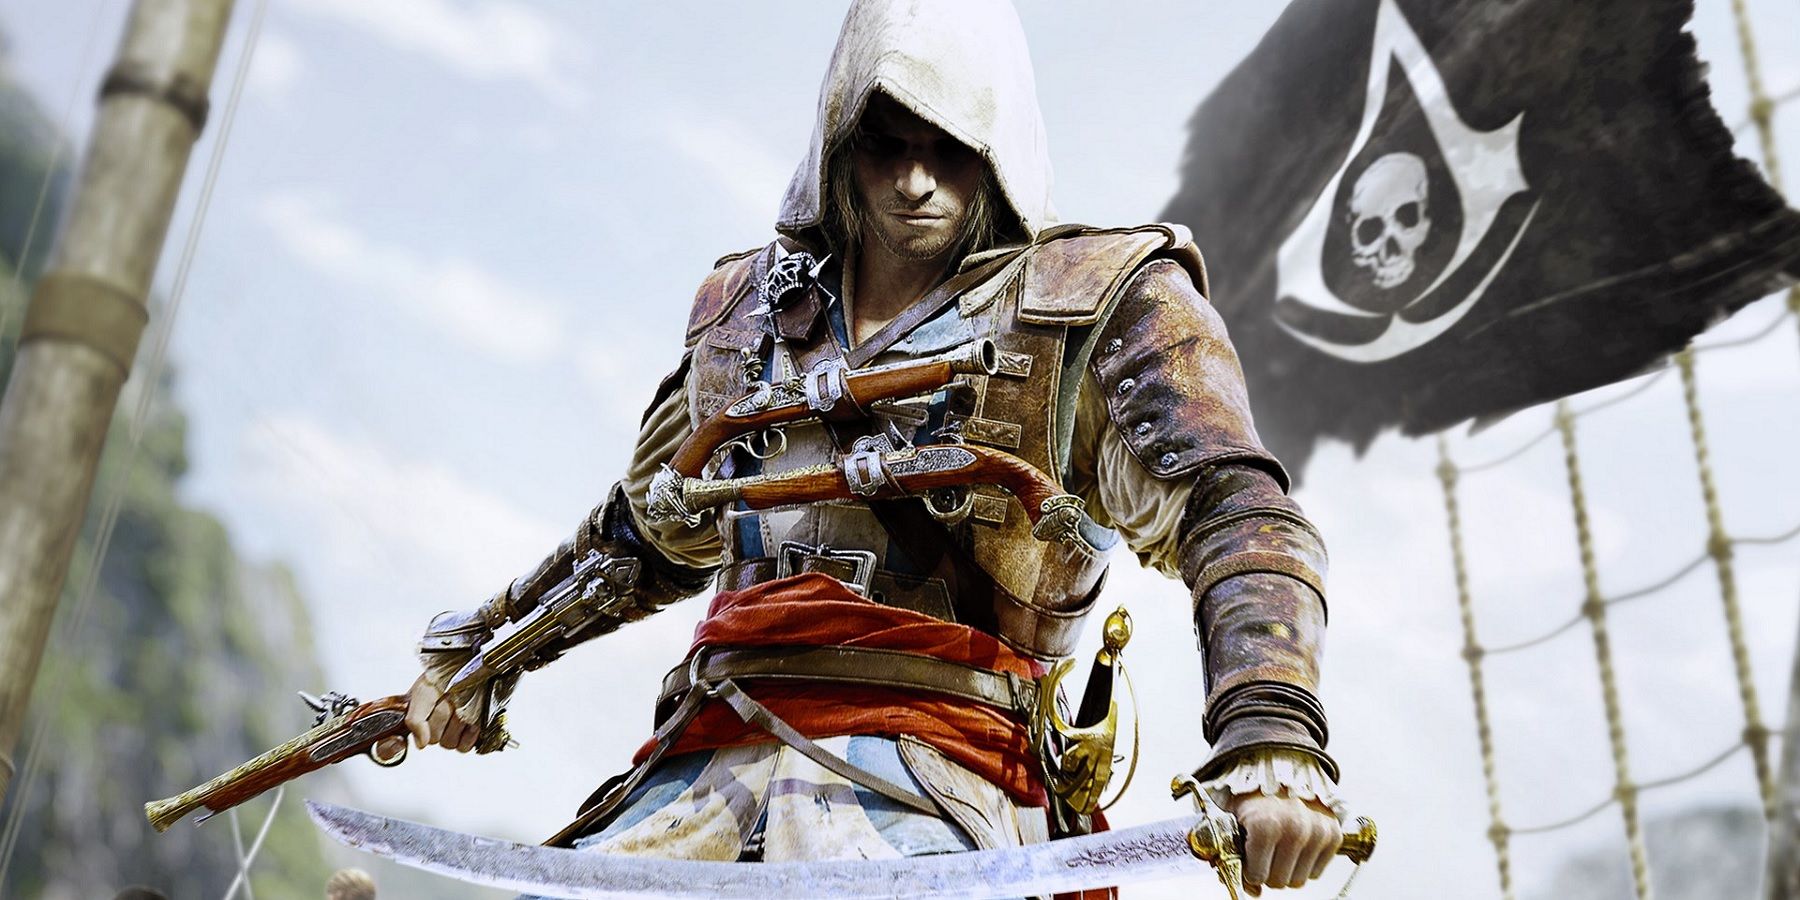 Ubisoft to go All-in on Assassin's Creed; 4 Game Projects Planned [RUMOR]